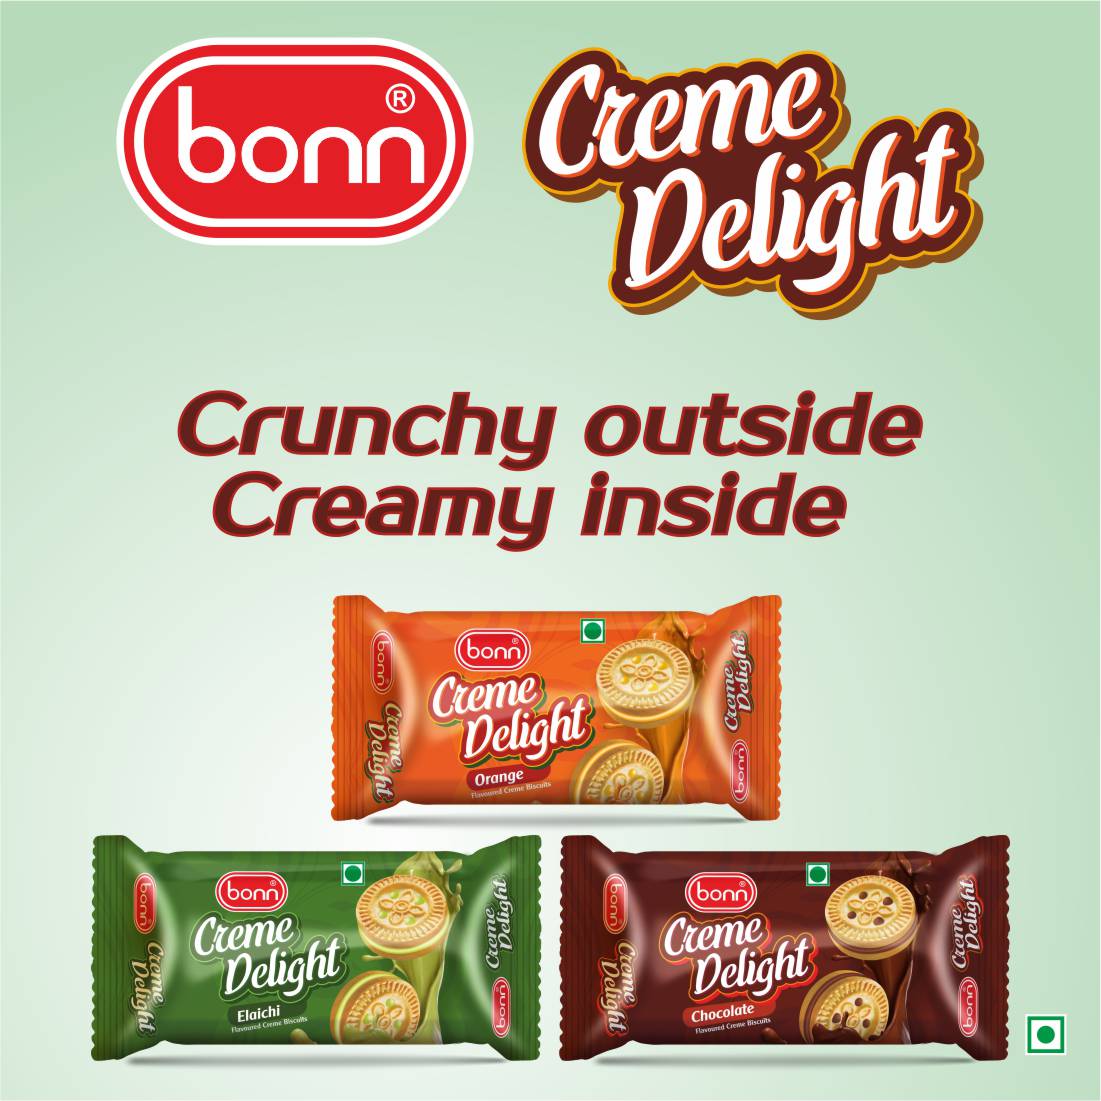 Bonn Creamy Delight 38g Combo pack (Orange, Chocolate and Elaichi Flavour) 5 Pack Each